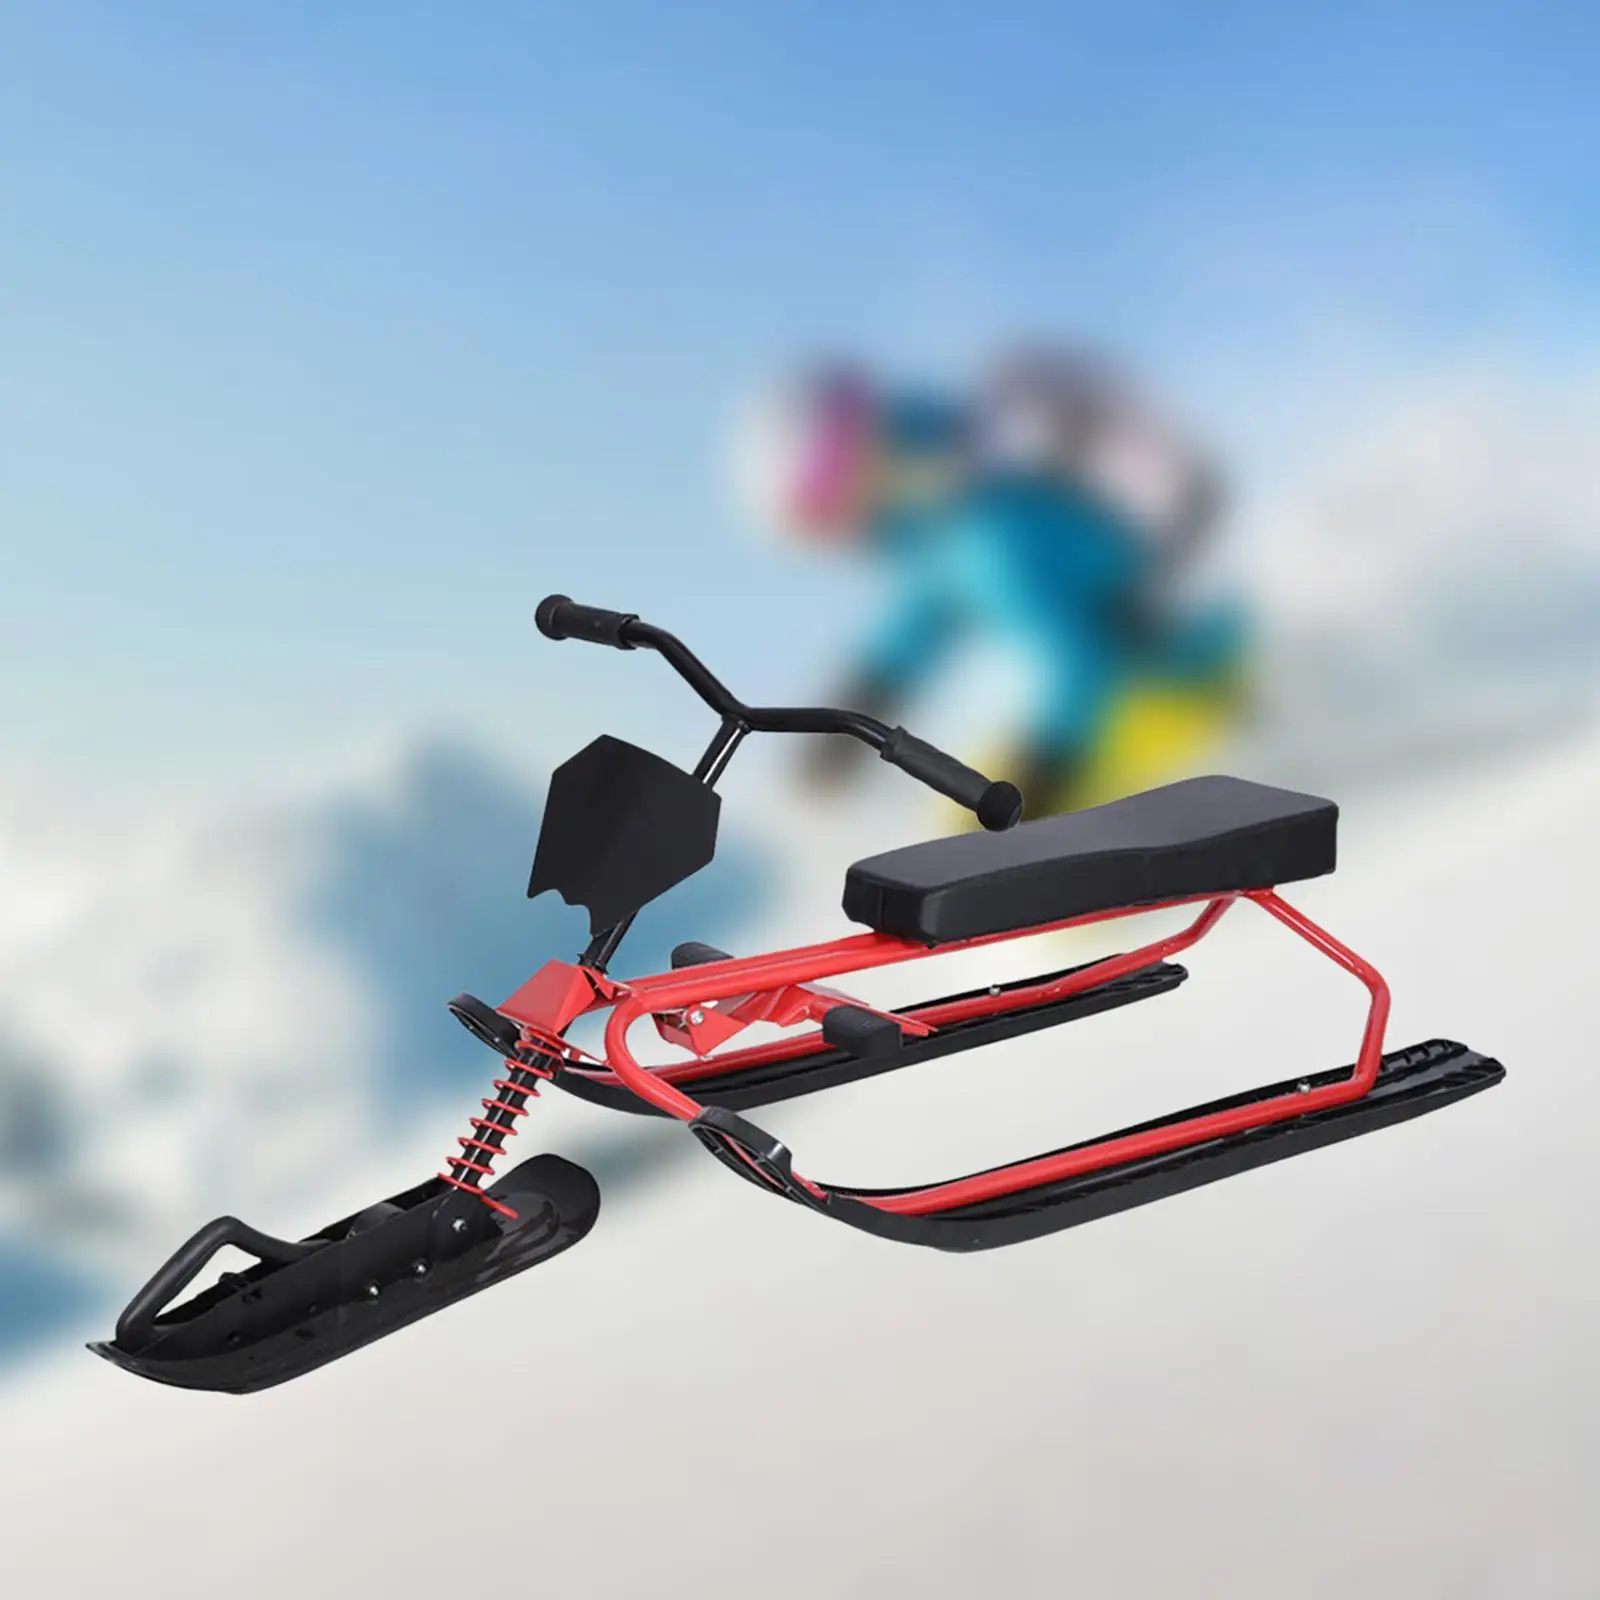 Snow Racer with Steering Wheel and Twin Brakes Snow Sled for Downhill and Uphill Snowboard Ski Sled for Outdoor Activities Kids